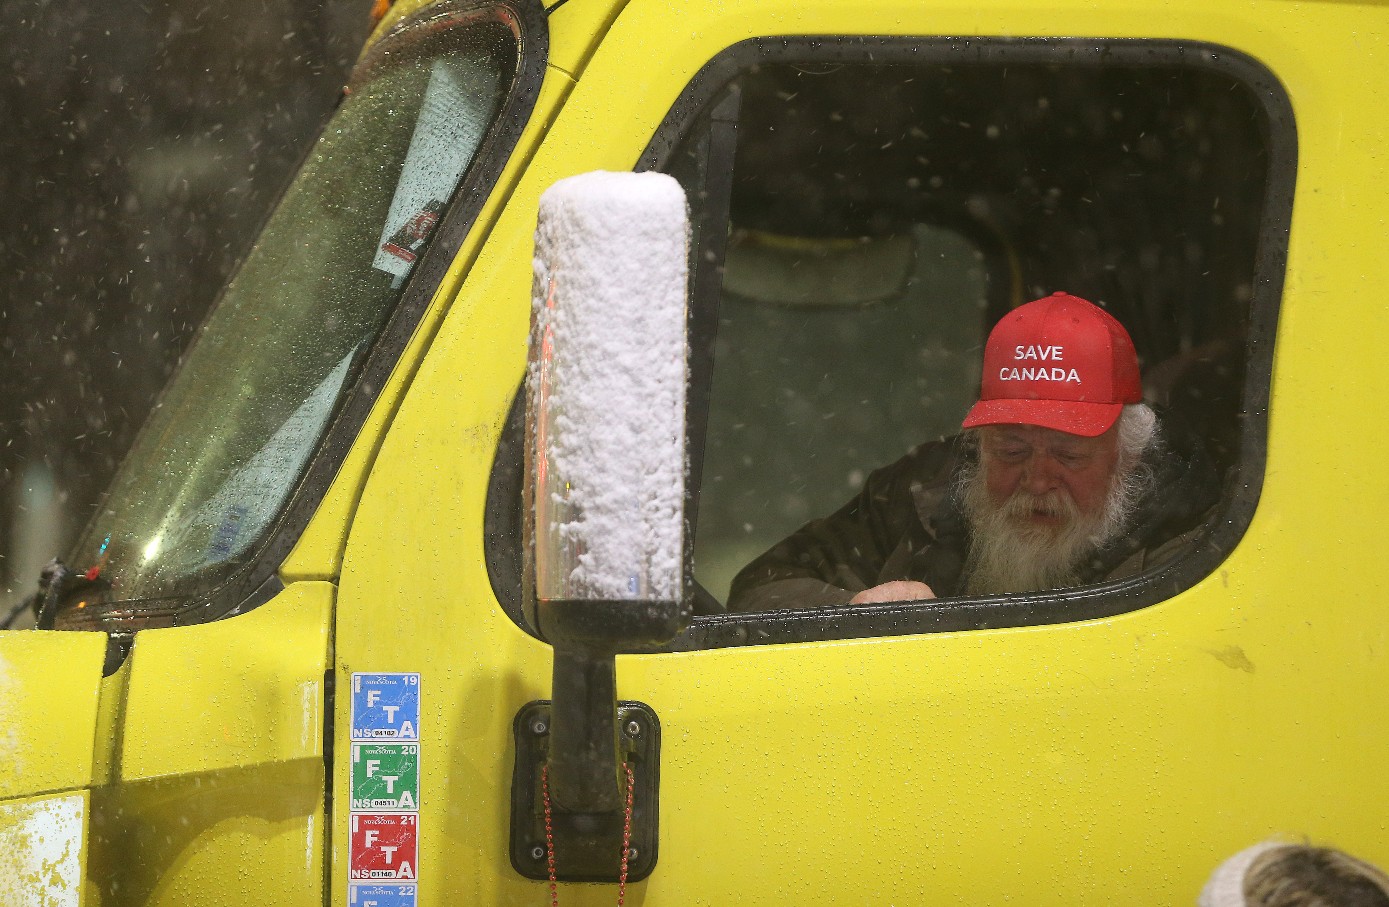 Canadian Truckers: a Working-Class Protest?